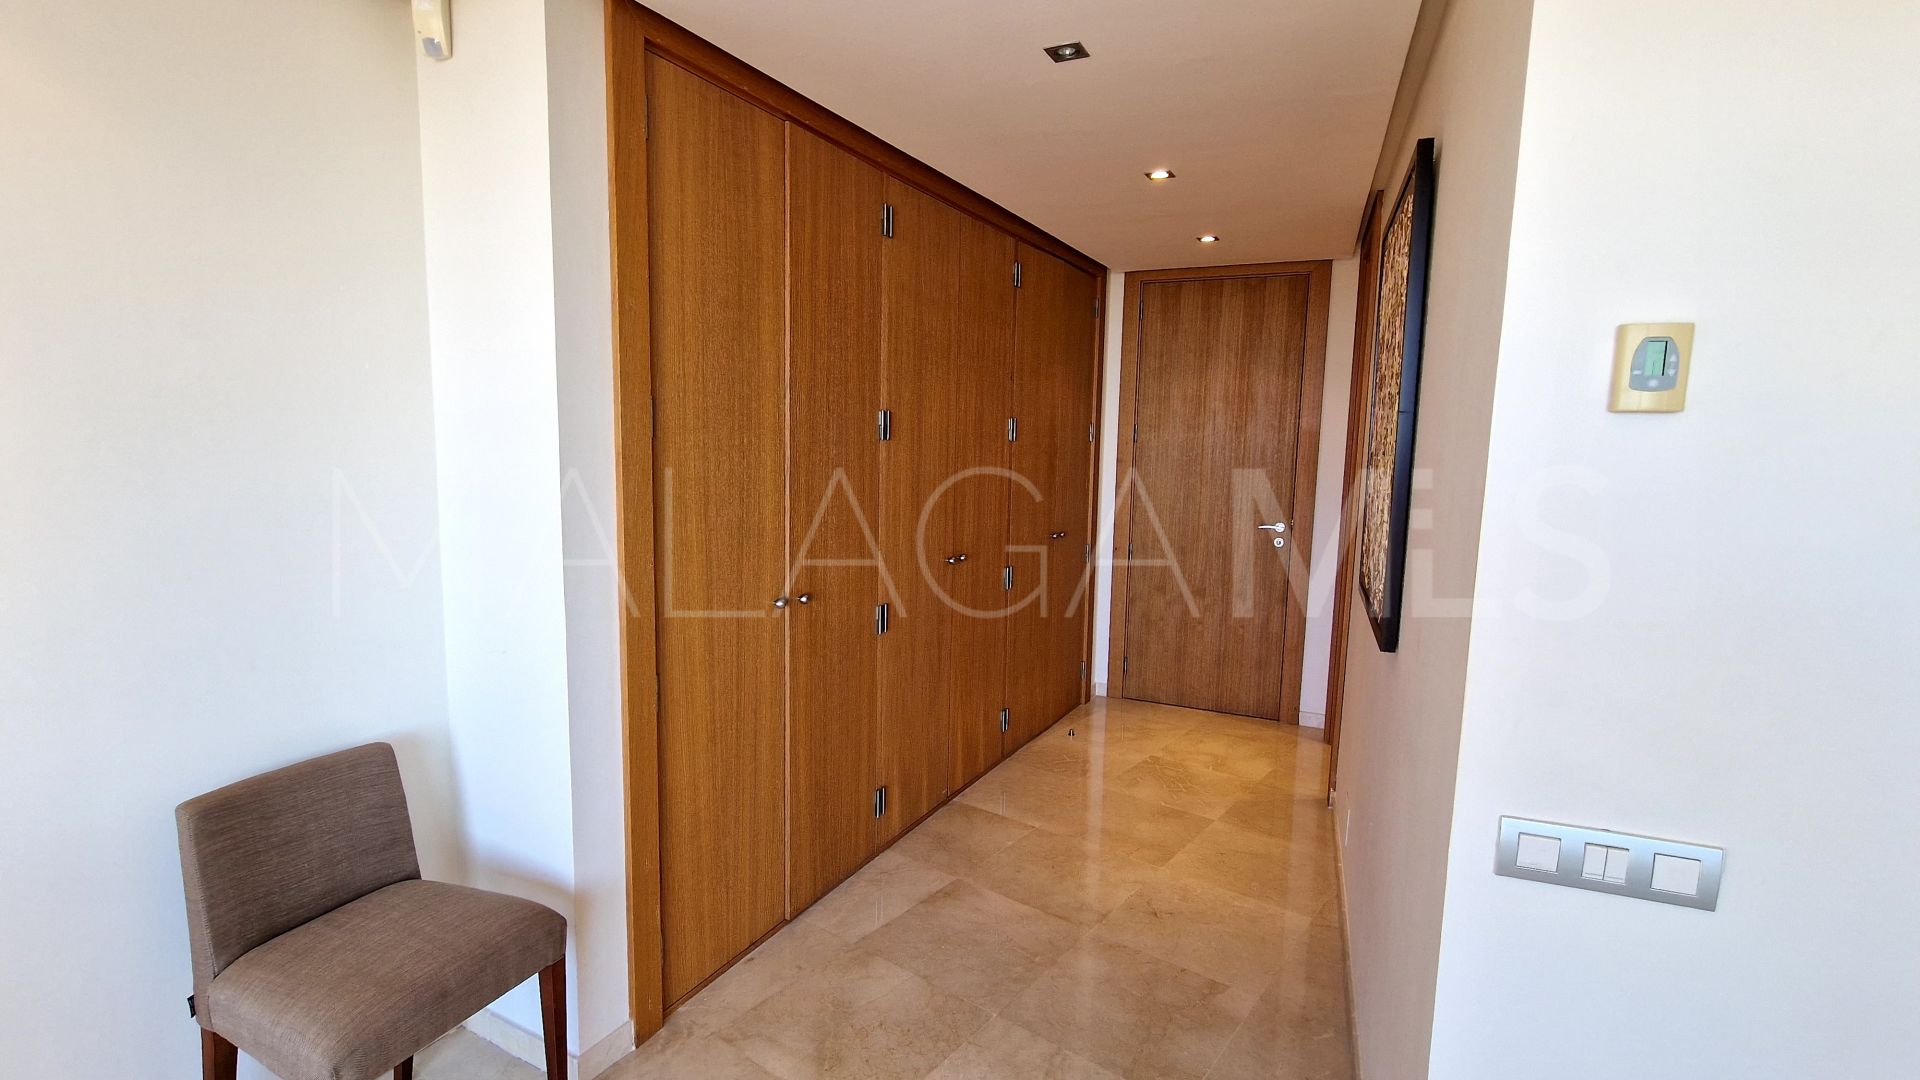 For sale Imara duplex penthouse with 3 bedrooms